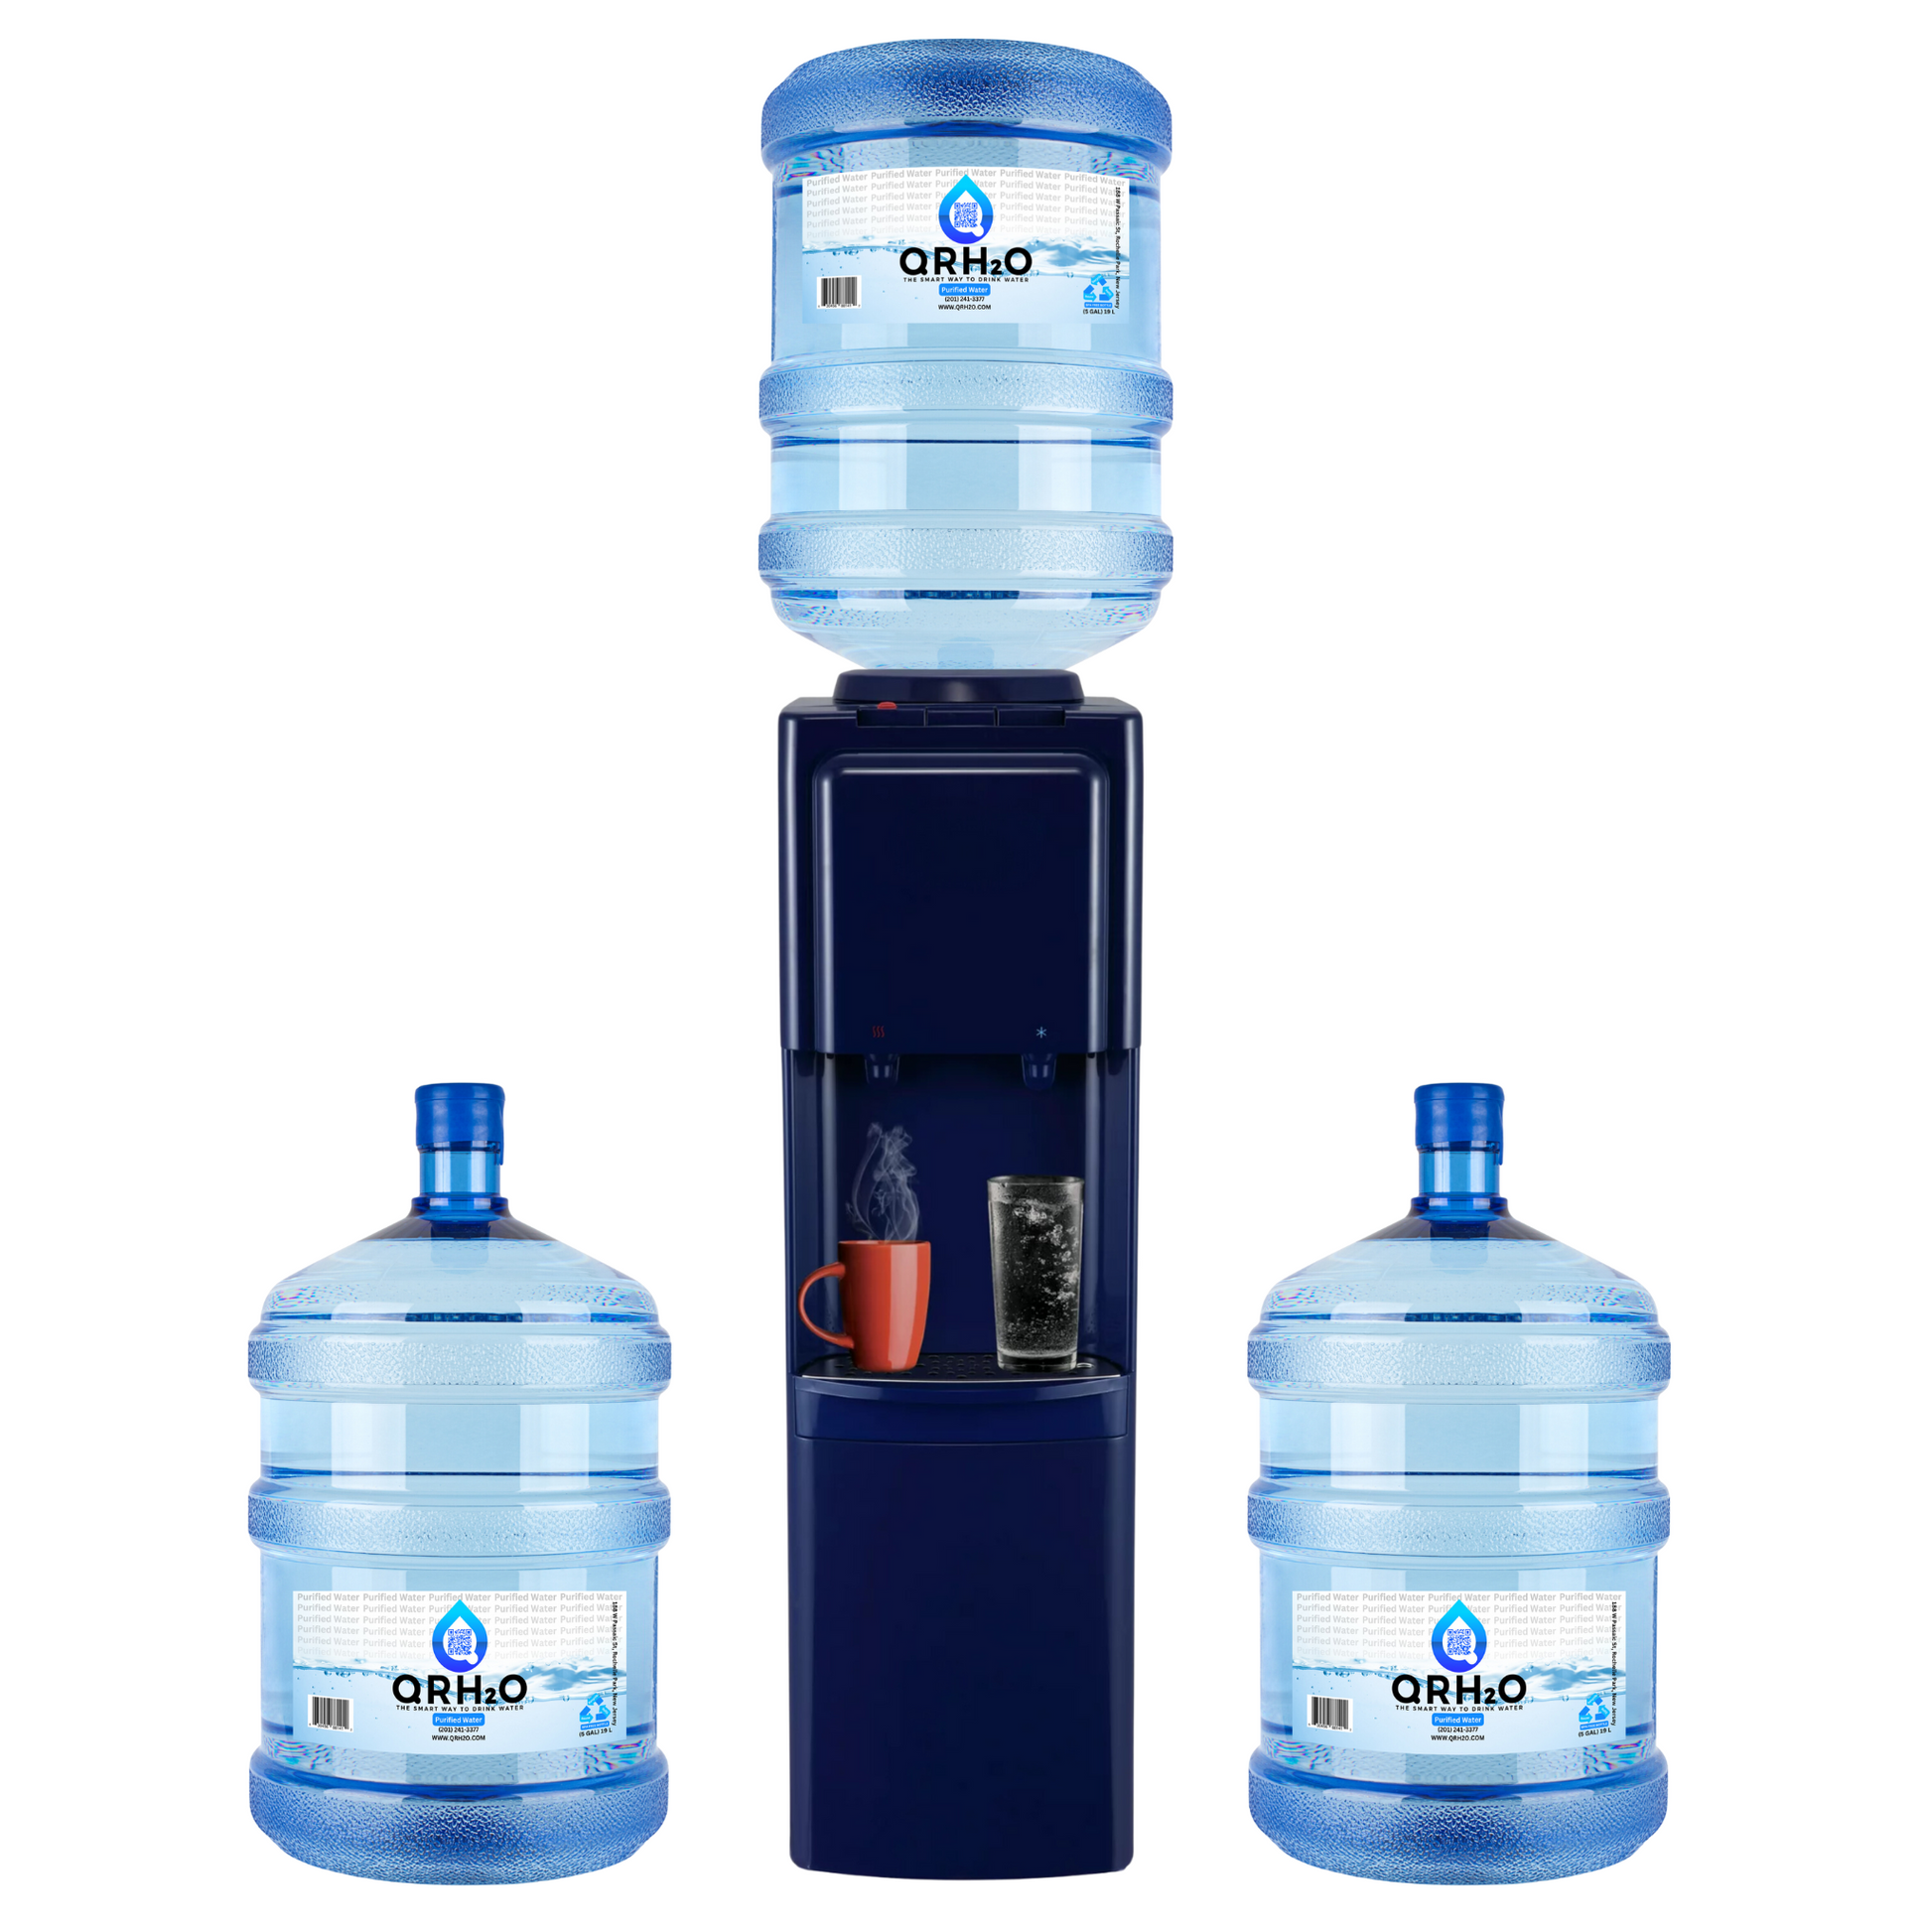 Get fresh, clean water anytime with 3 of our 5-gallon bottles, available in your choice of purified or alkaline water, and a top loading hot and cold dispenser in navy blue from Primo.